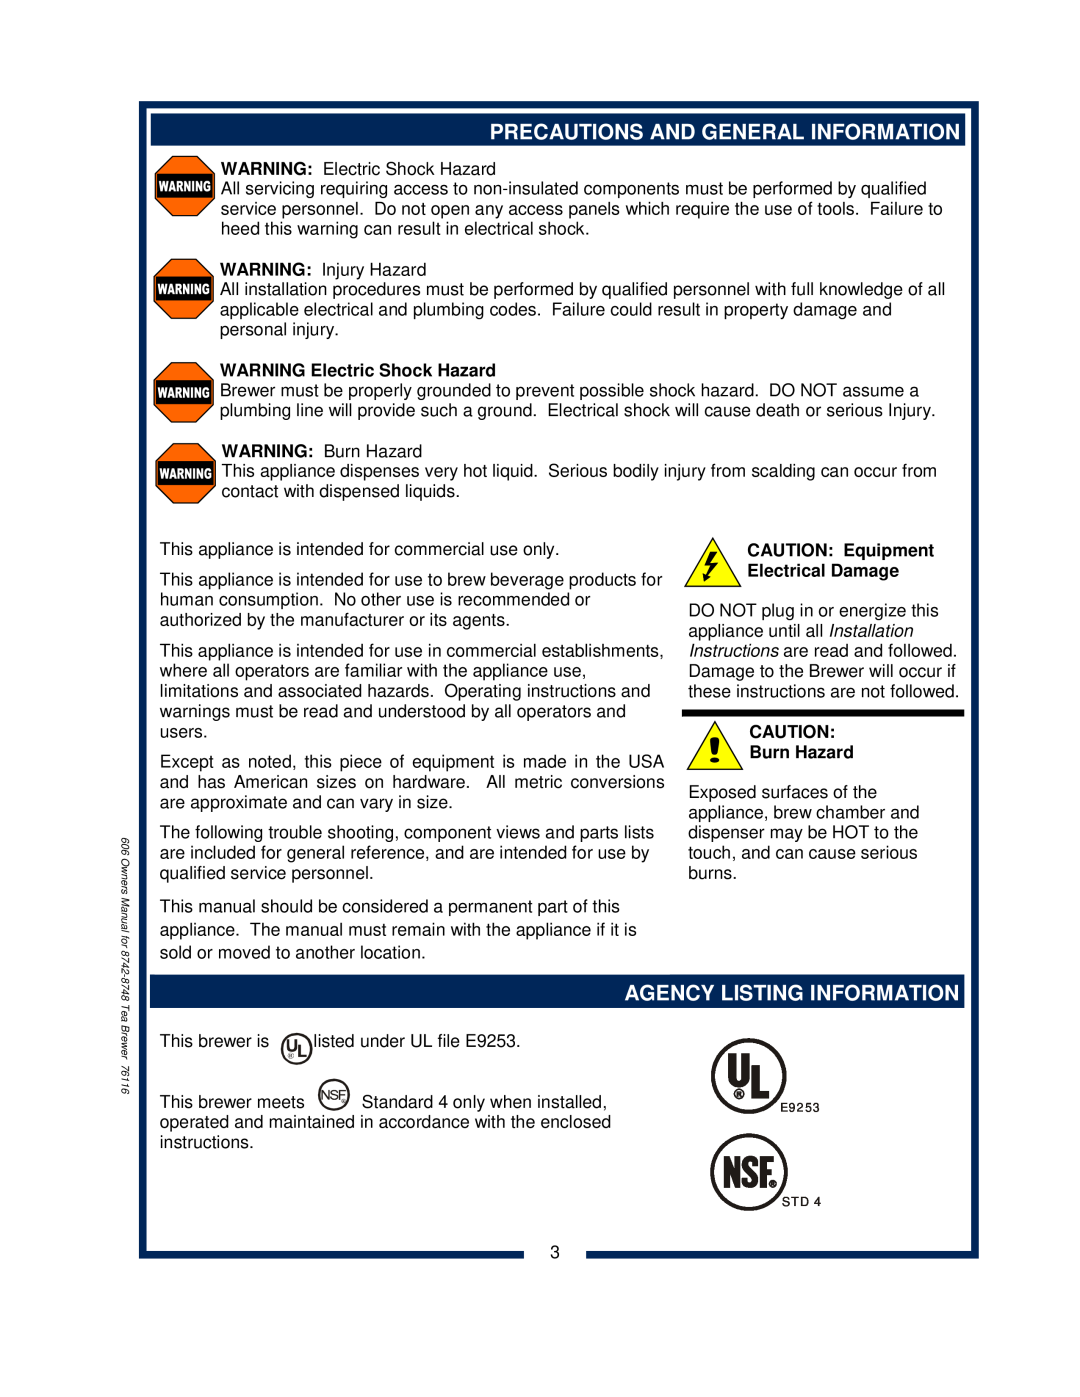 Bloomfield 8742 owner manual Precautions And General Information, Agency Listing Information, WARNING Electric Shock Hazard 